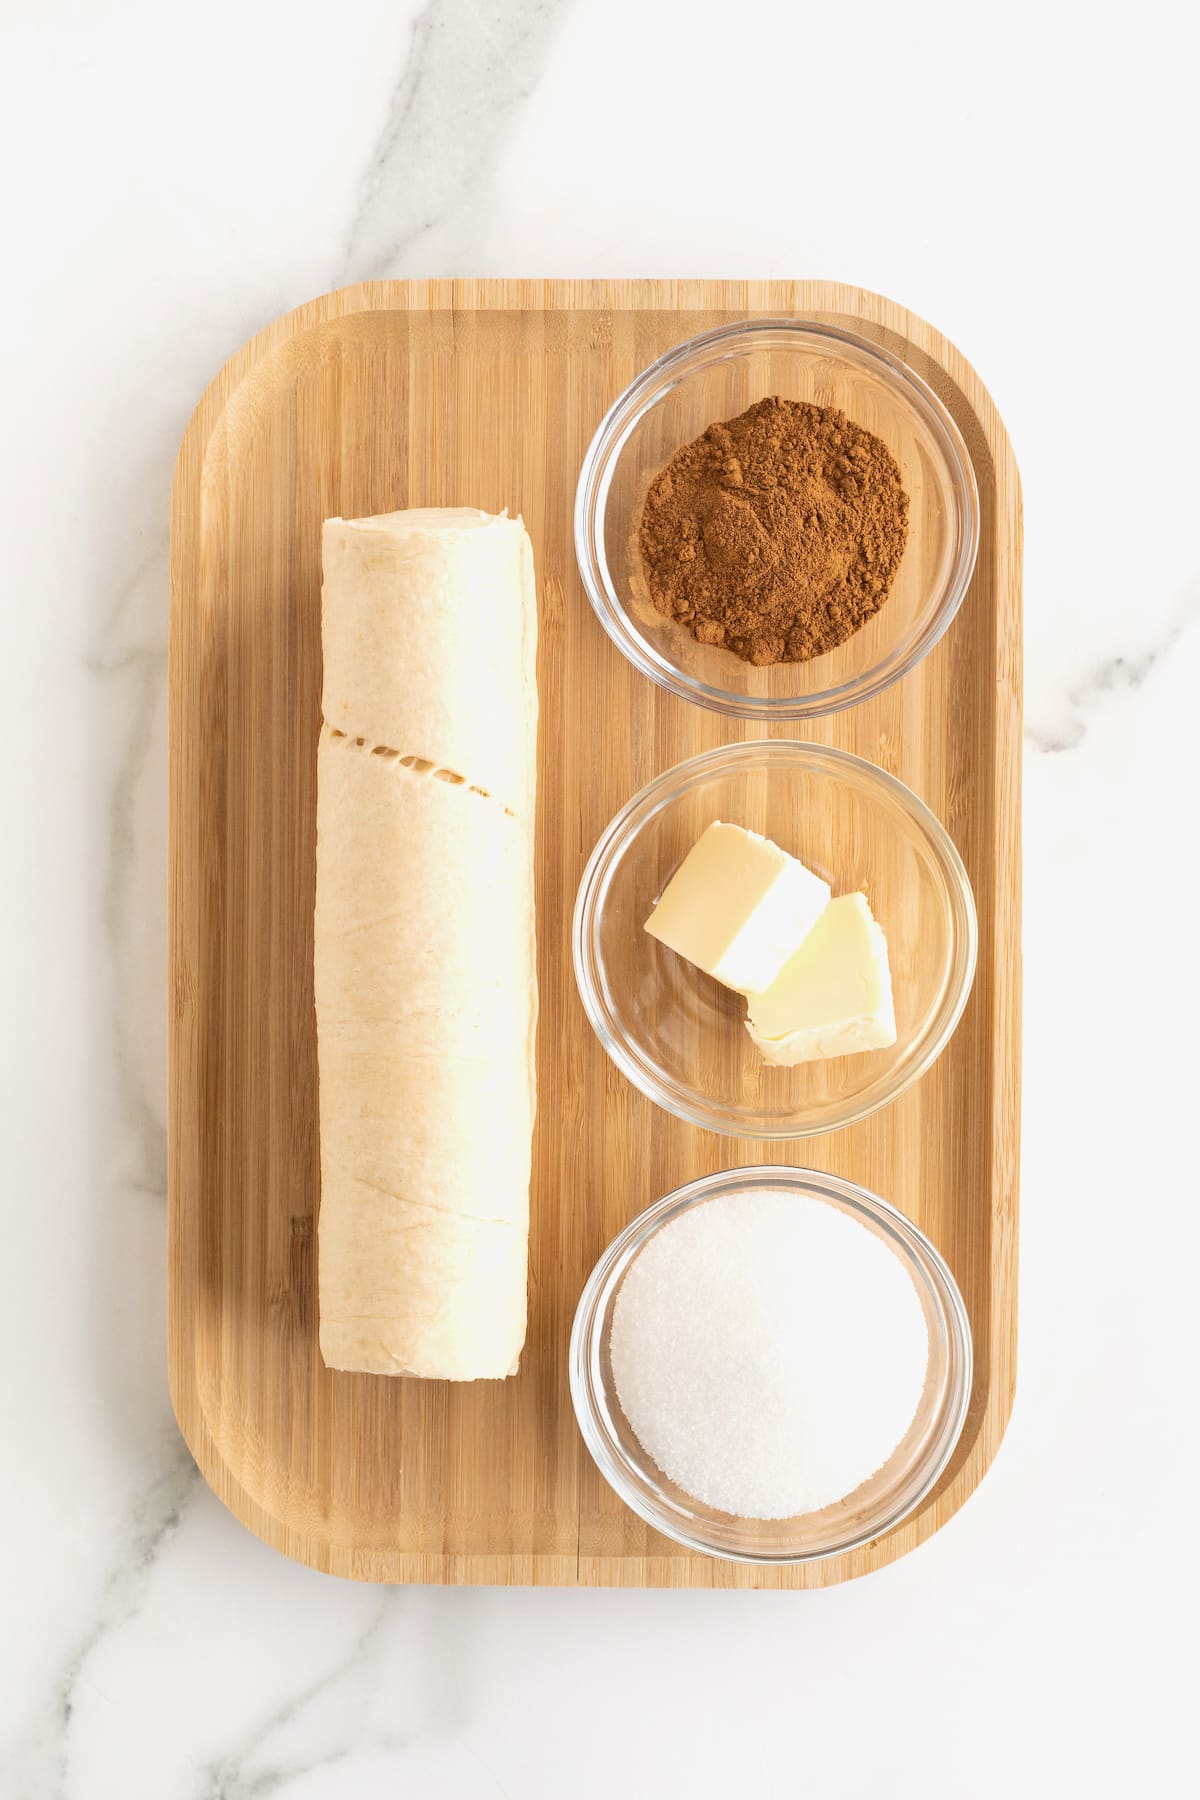 A roll of canned crescent dough and butter, cinnamon, and granulated sugar in small glass dishes on a rimmed wooden cutting board.